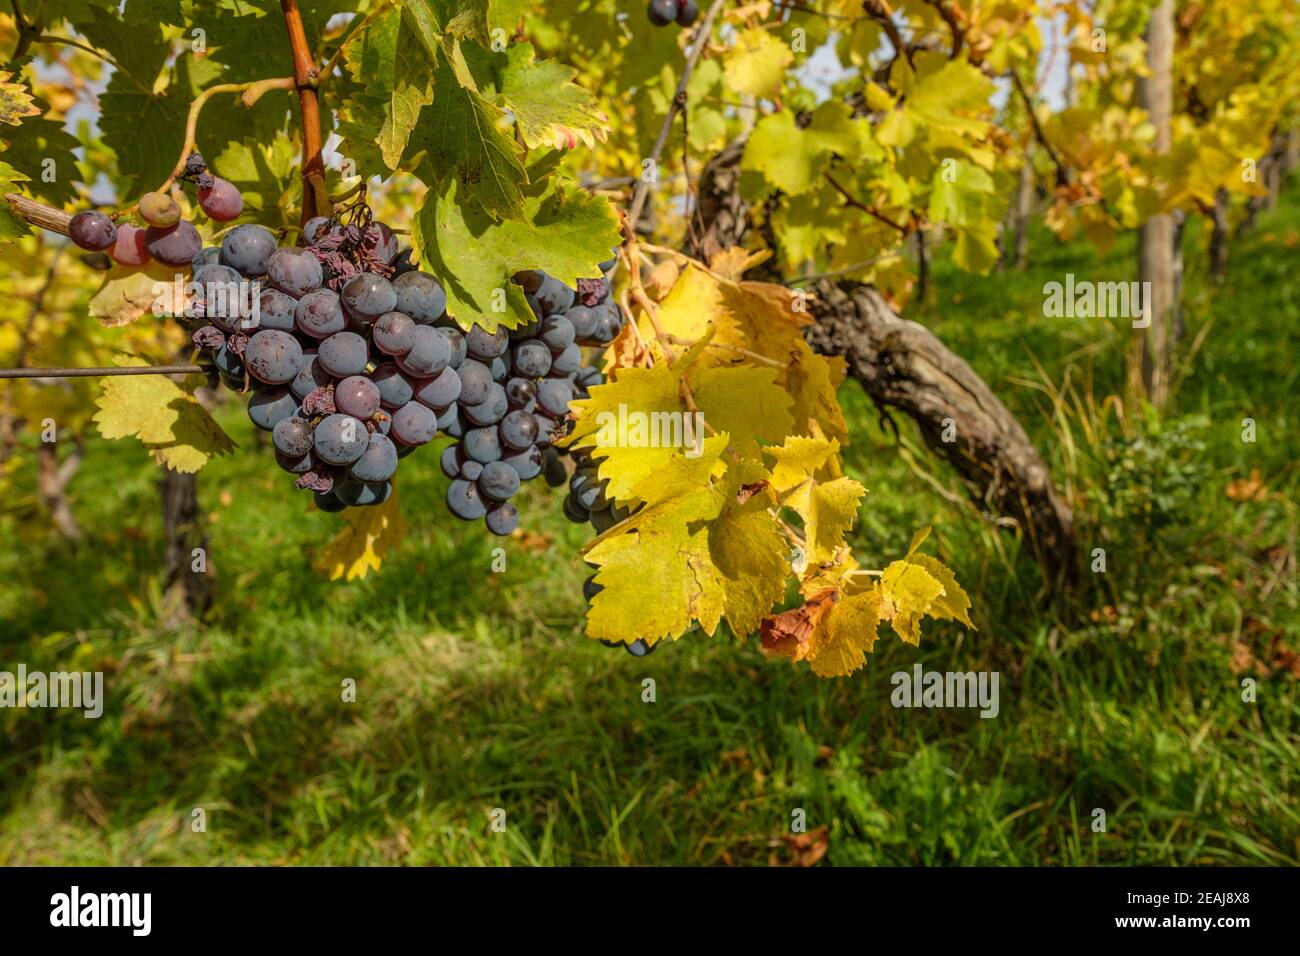 Ripe red grapes at a vine in a vineyard Stock Photo